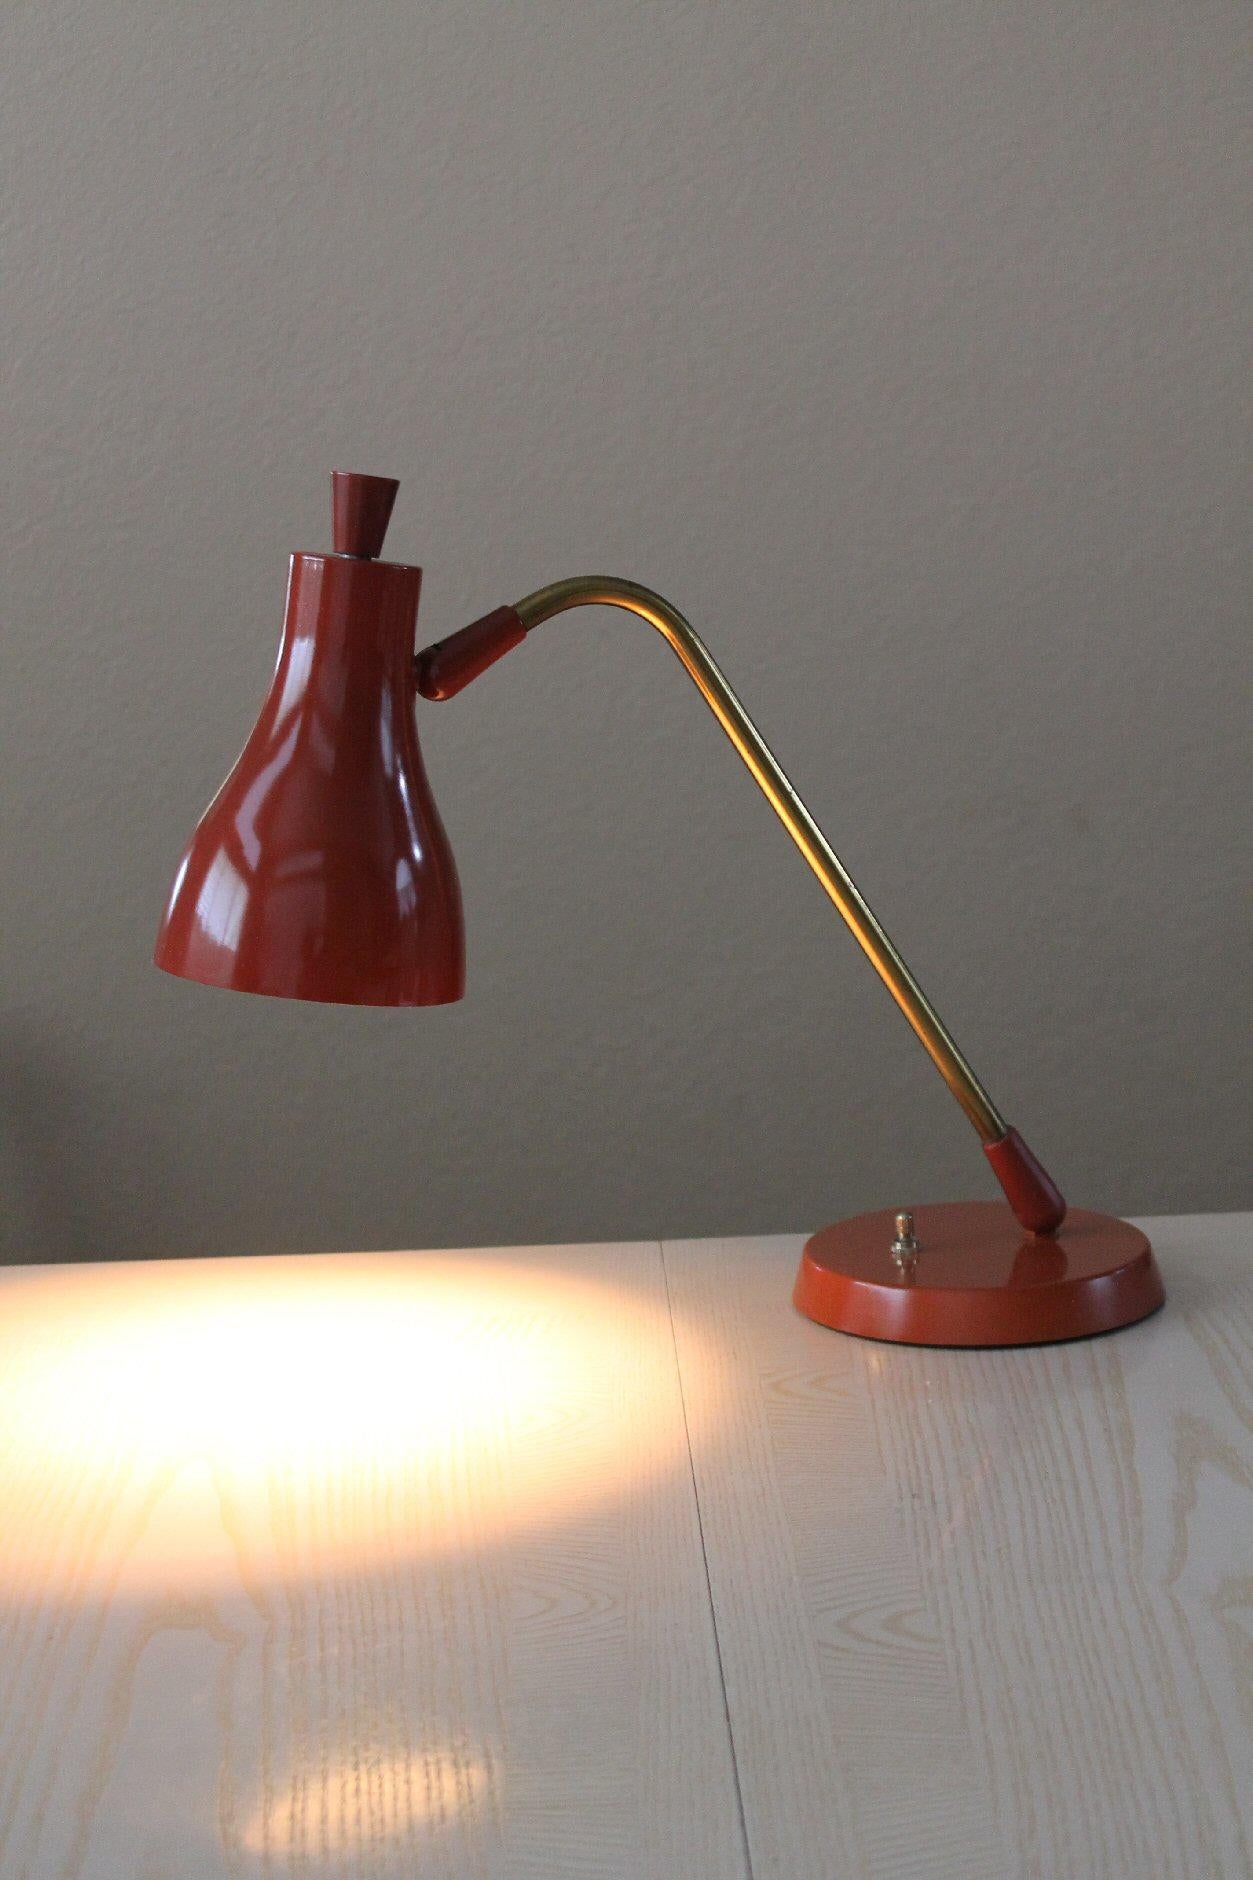 ICONIC!

Simply BEAUTIFUL LIGHTOLIER 
ARTICULATING SHADE DESK/TABLE LAMP
By GERALD THURSTON

Rare TERRA COTTA Color

Does your Case Study House need new lamps? This marvelous specimen is sure to be a welcome addition!

These lamps, penned by Gerald